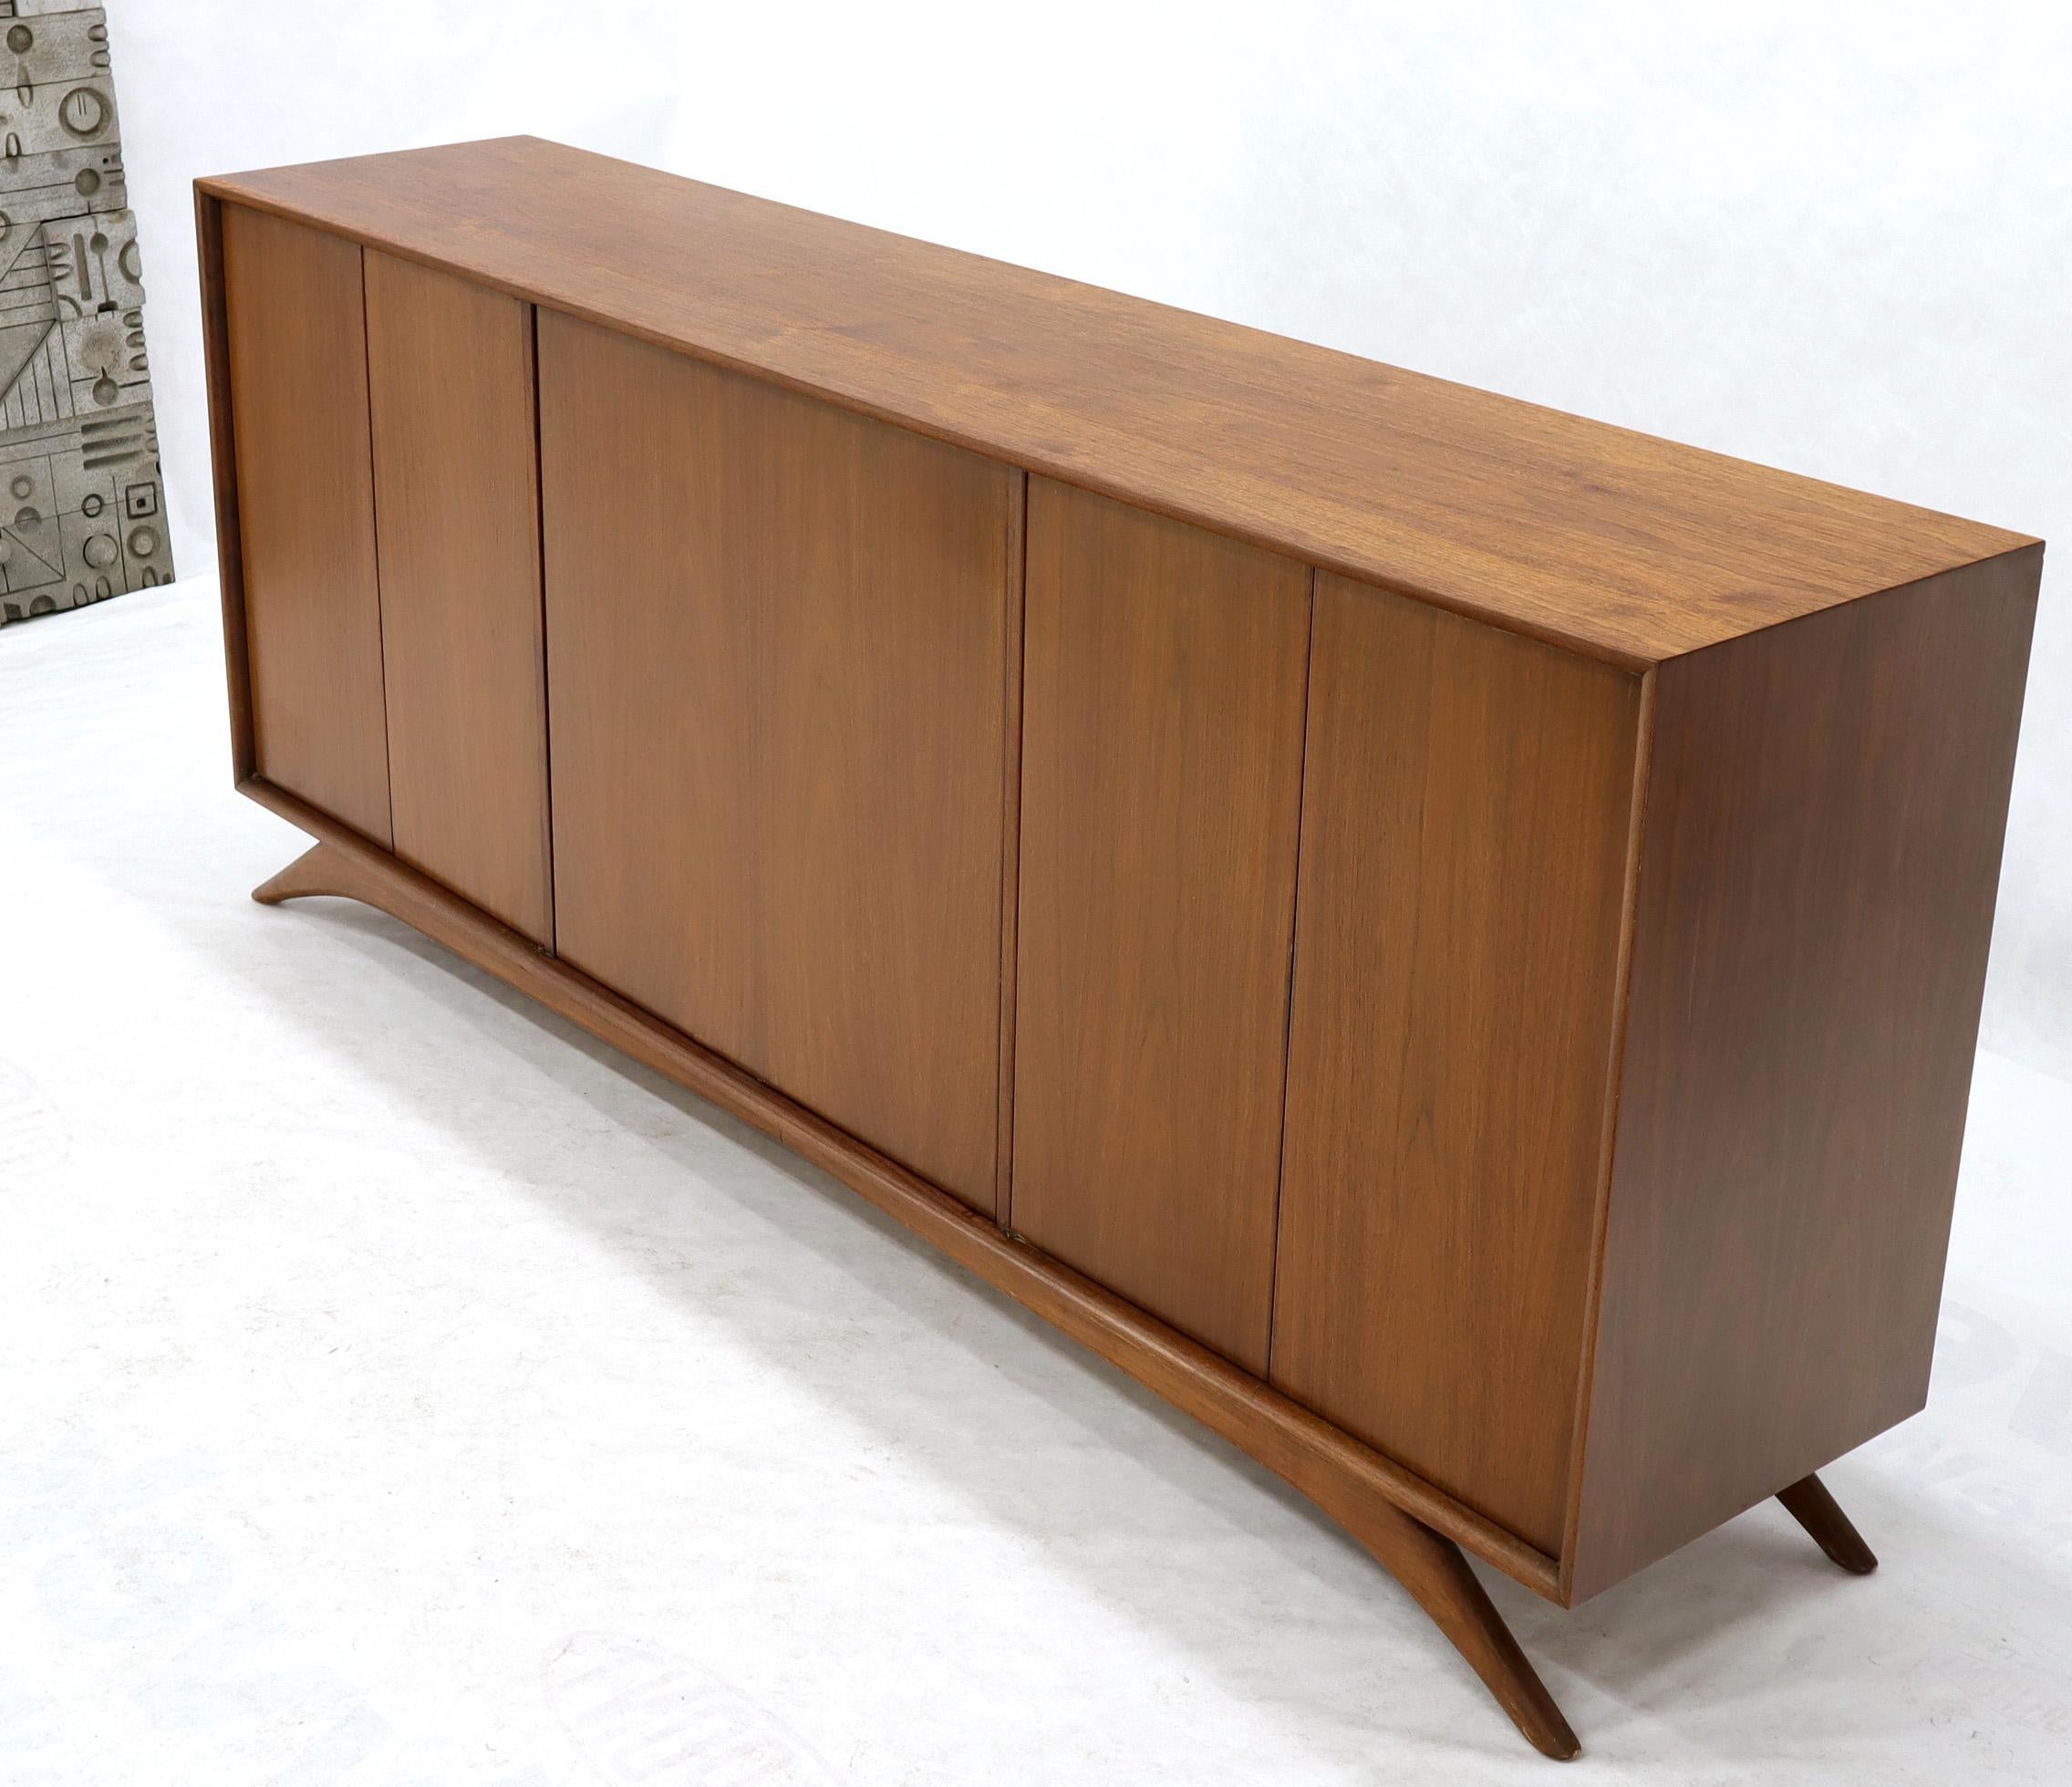 Kagan influence sculptural legs Mid-Century Modern three compartment side board credenza with swivel bar in the centre compartment. Beautiful walnut finish. When fully open the centre bar column light up.